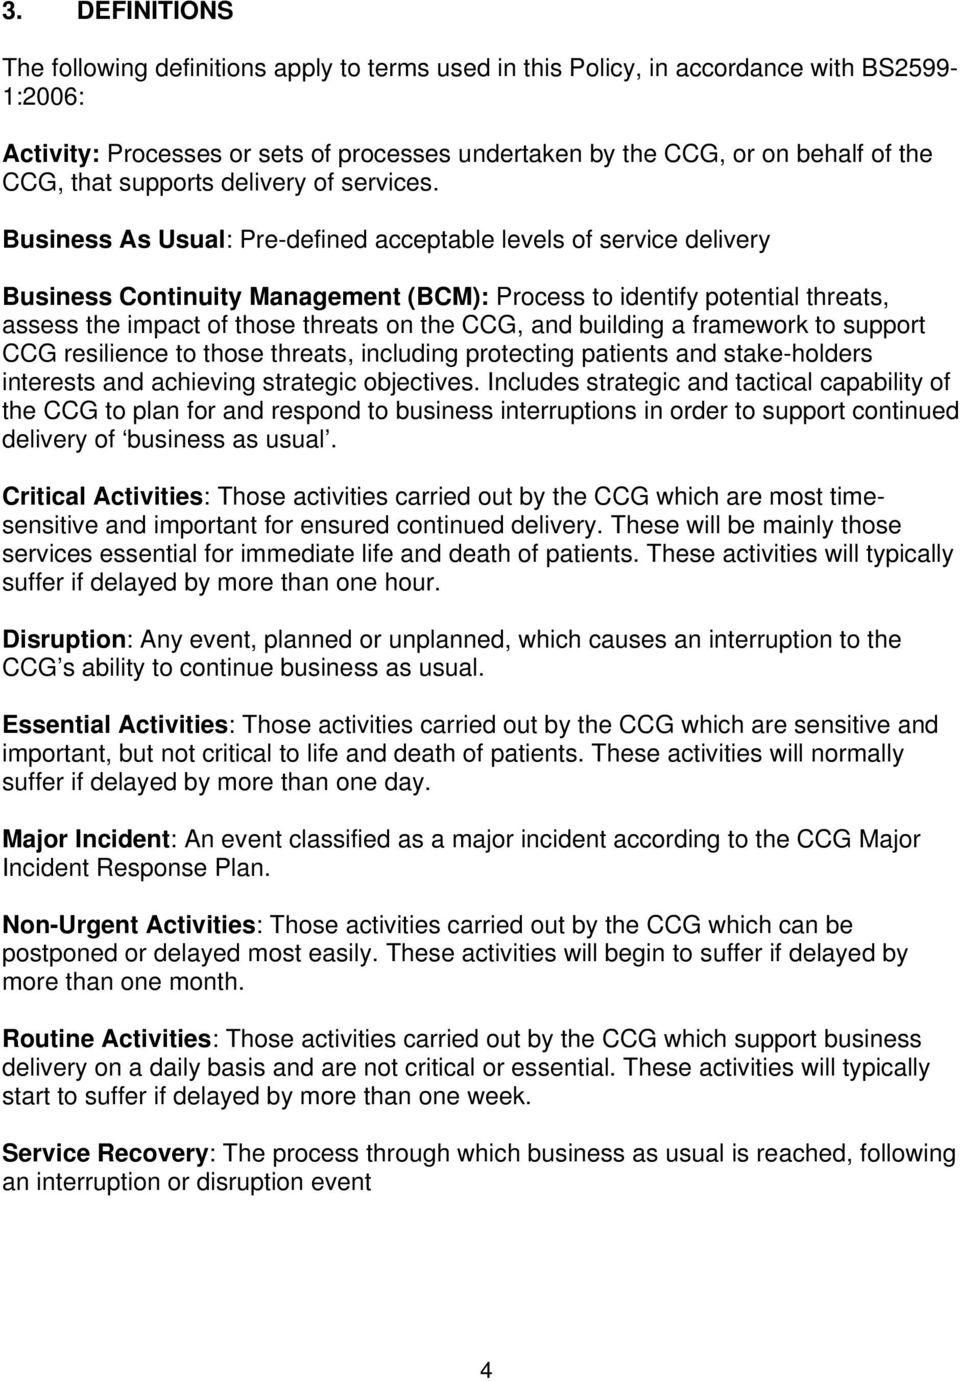 Business As Usual: Pre-defined acceptable levels of service delivery Business Continuity Management (BCM): Process to identify potential threats, assess the impact of those threats on the CCG, and